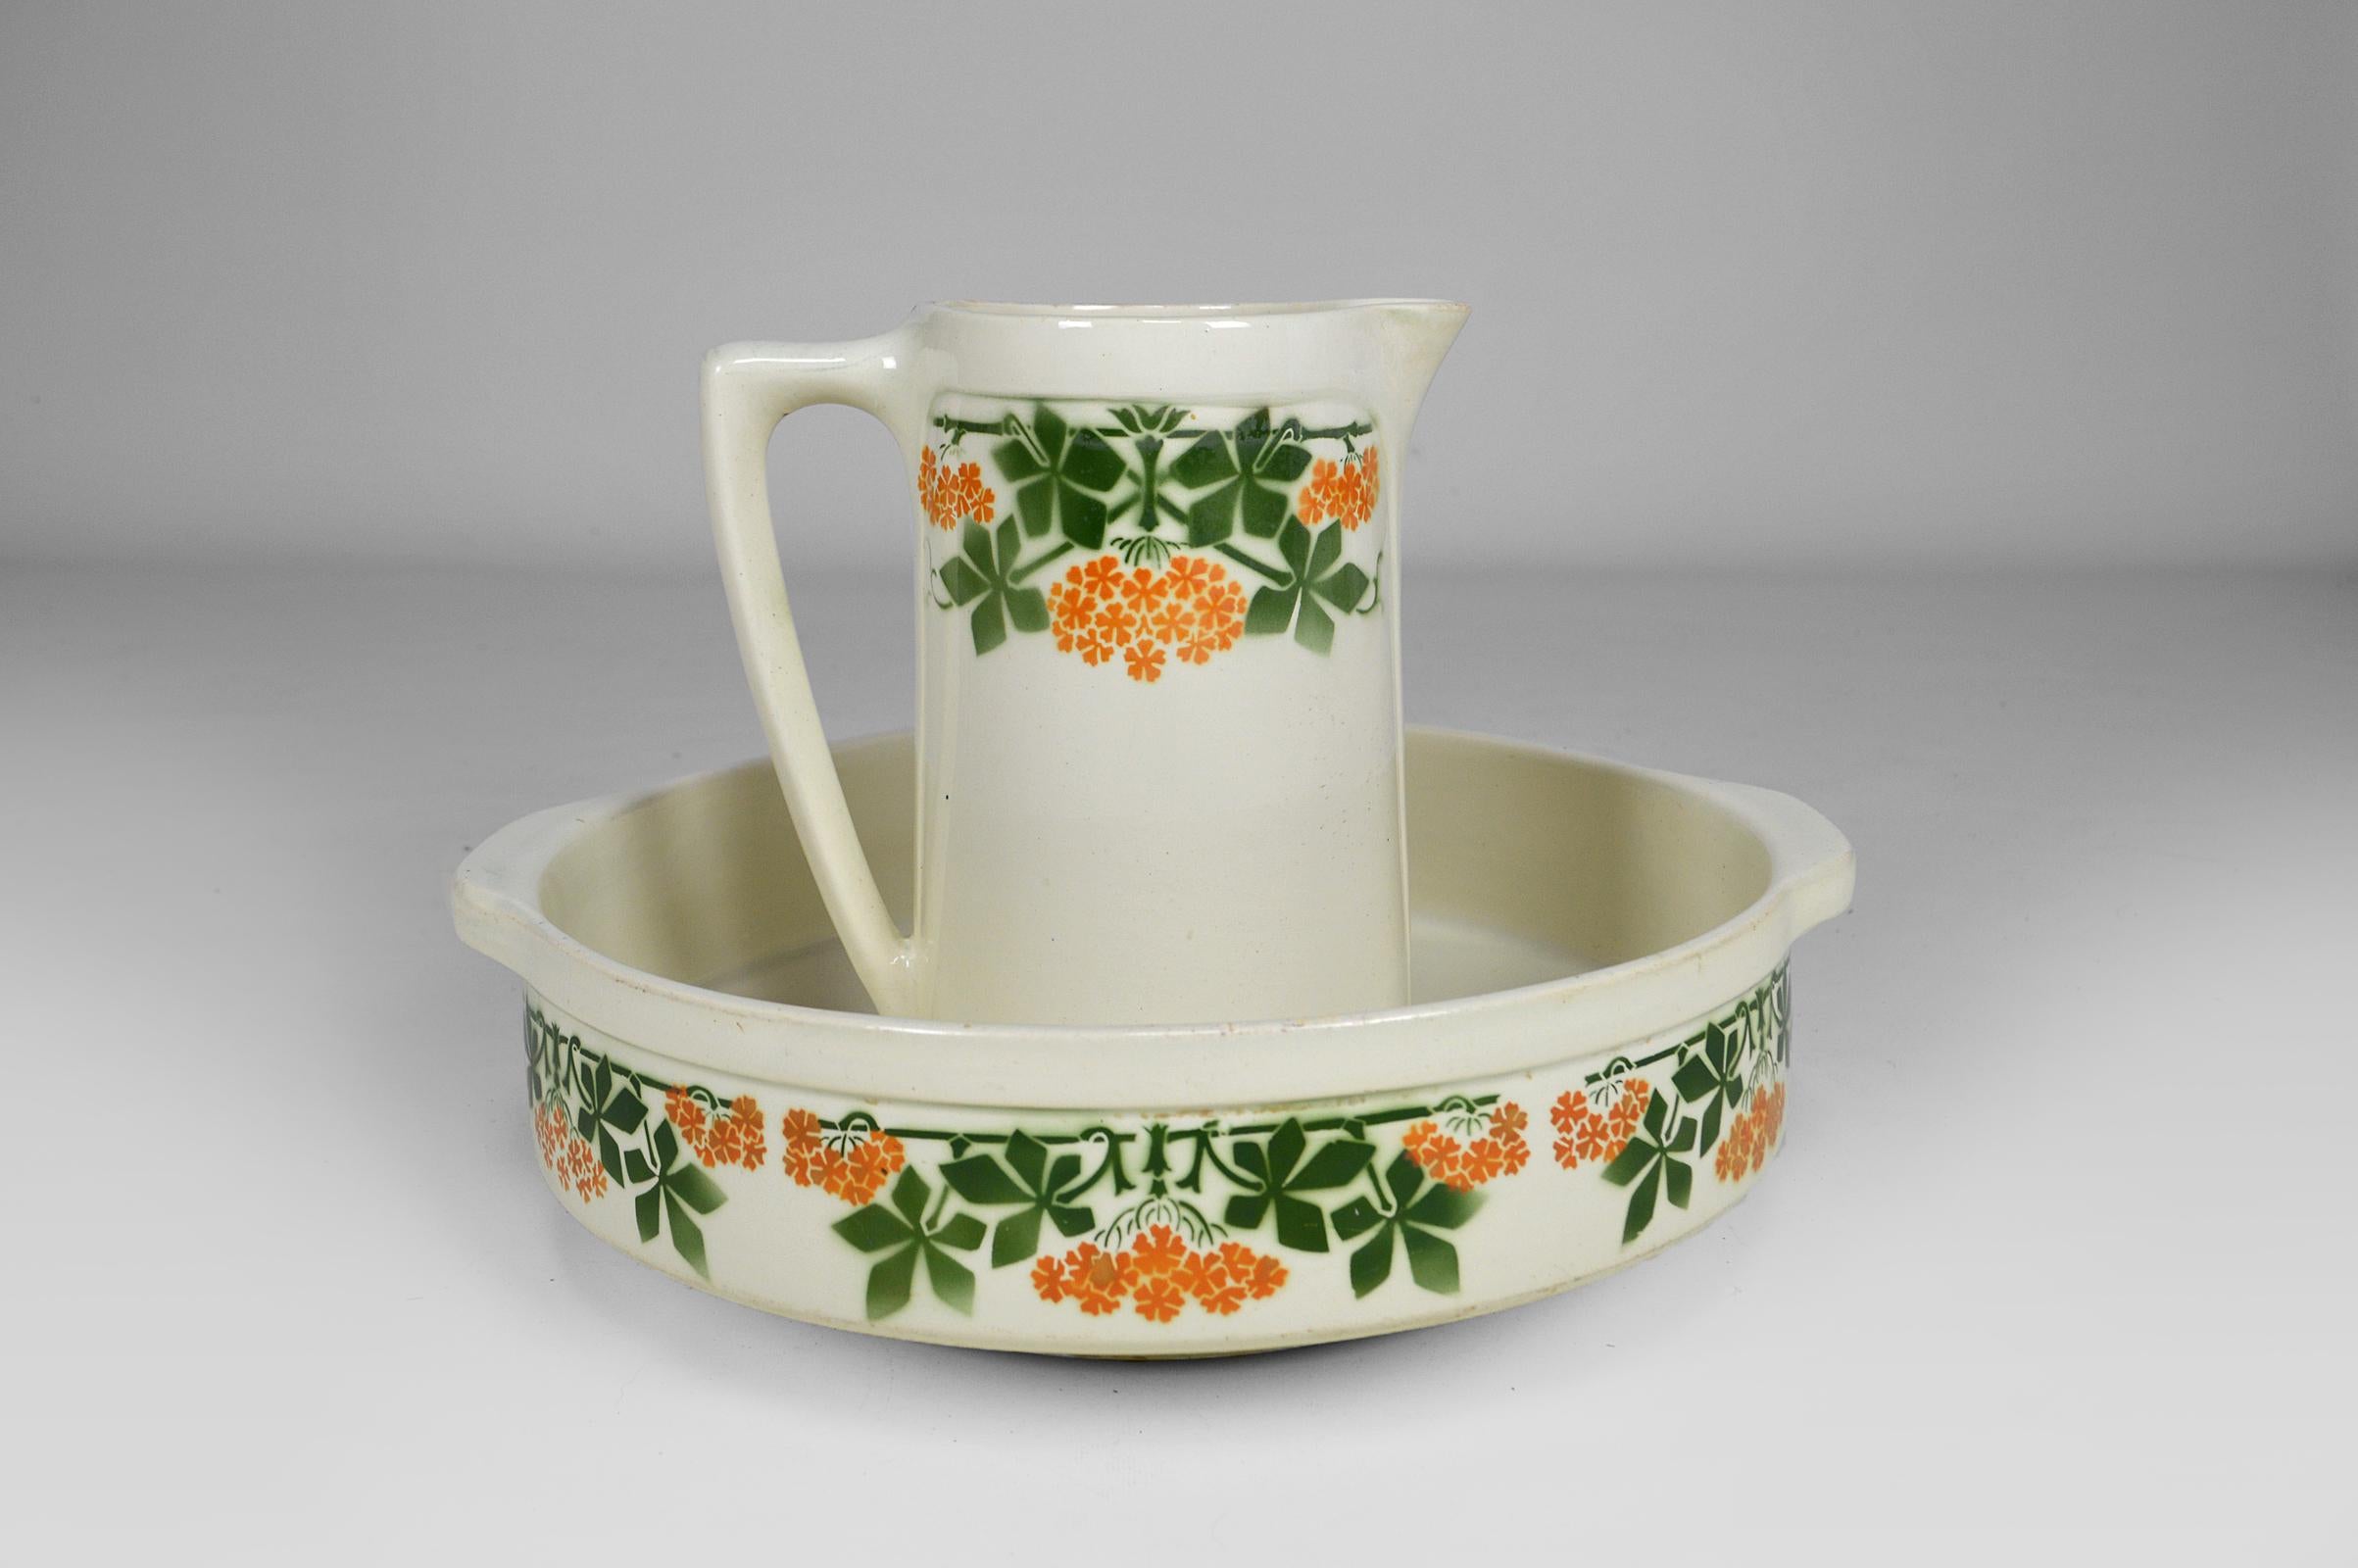 Elegant toiletry kit consisting of a pitcher and its bowl.
In white earthenware enhanced with a green and yellow floral frieze.

Art Nouveau, France, circa 1900.
Signed Keller & Guérin Lunéville. Chestnut tree series.
In good condition.

Dimensions